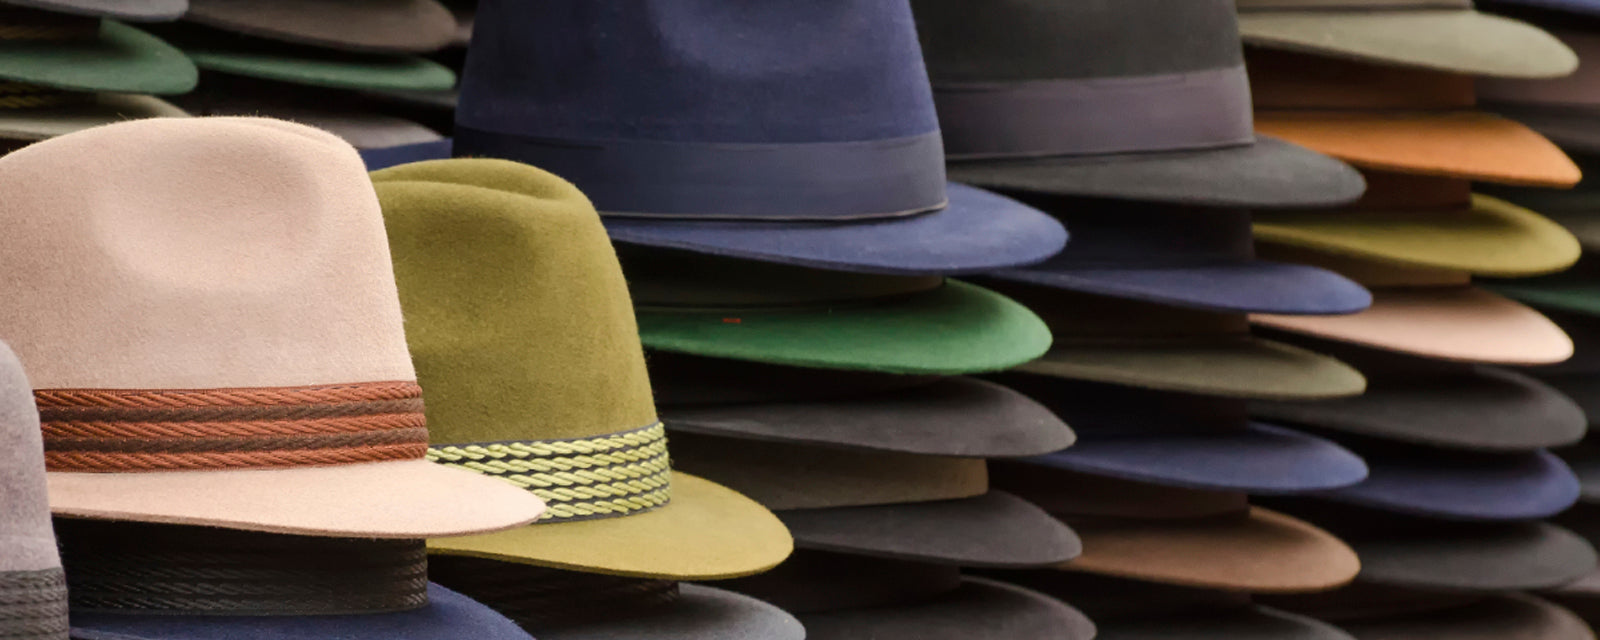 stack of fedoras hats